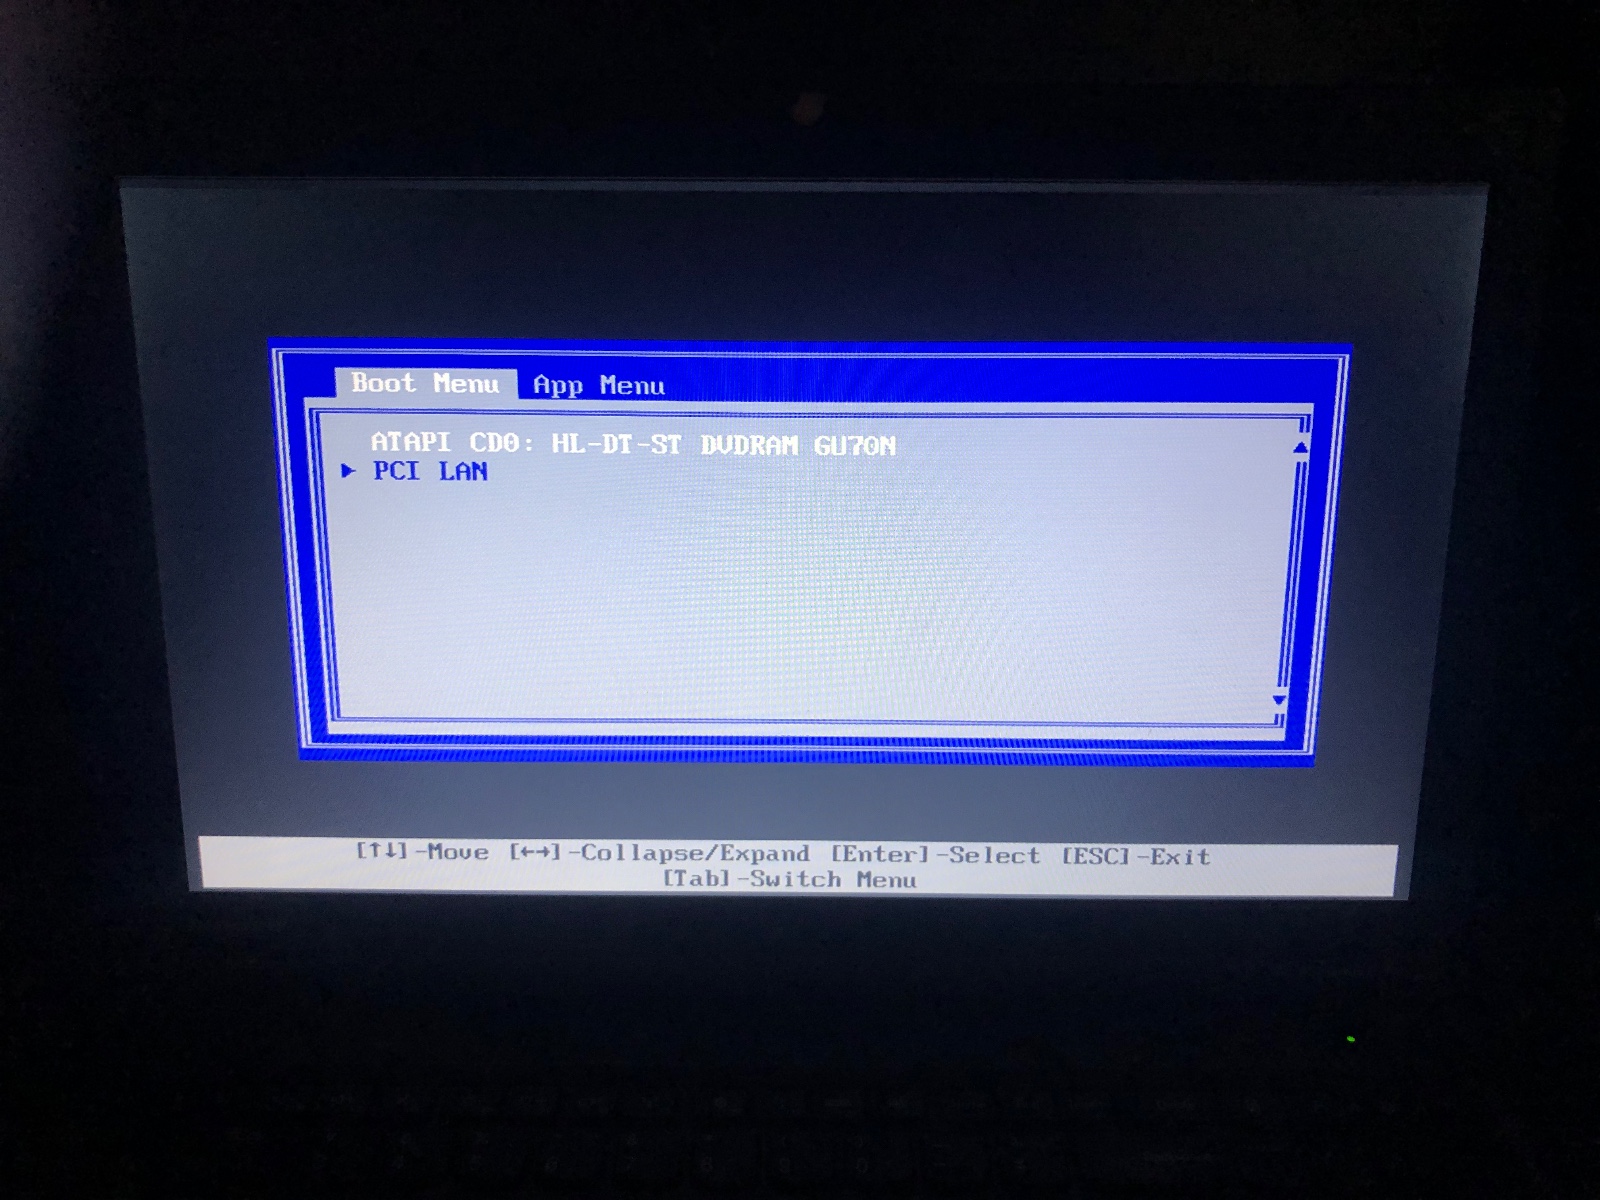 HELP-I-am-stuck-in-boot-menu-and-it-won-t-let-me-pick-a-drive-to-boot-from  - English Community - LENOVO Comunidade